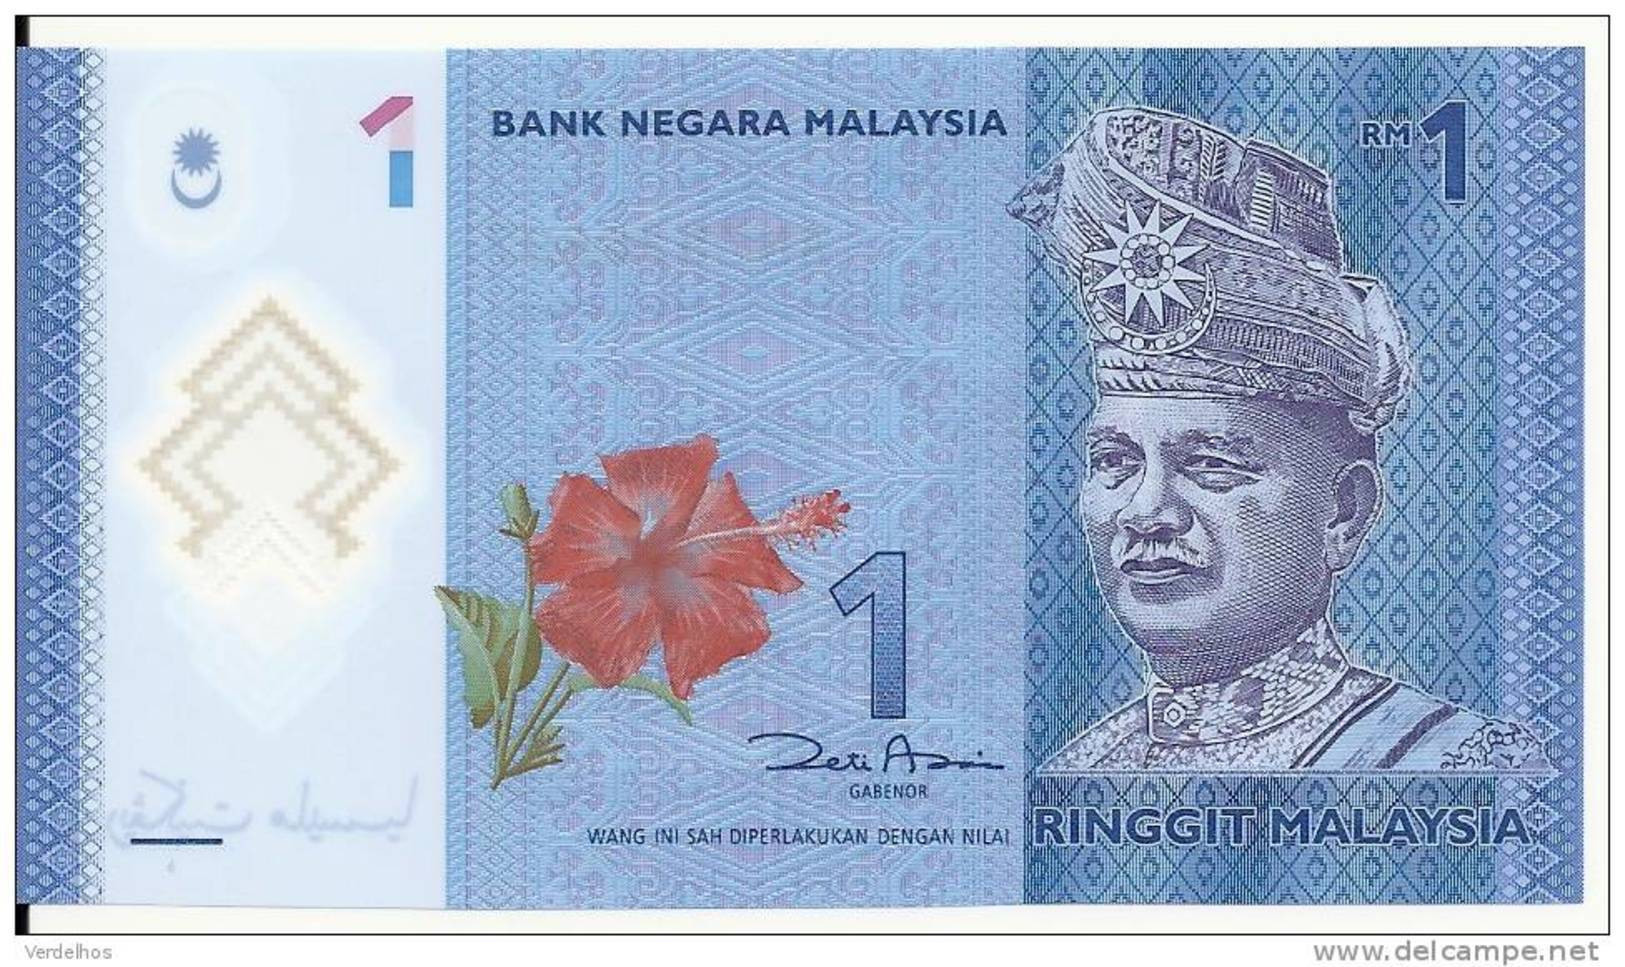 MALAYSIE 1 RINGGIT 2012 UNC P 51 - Malaysie